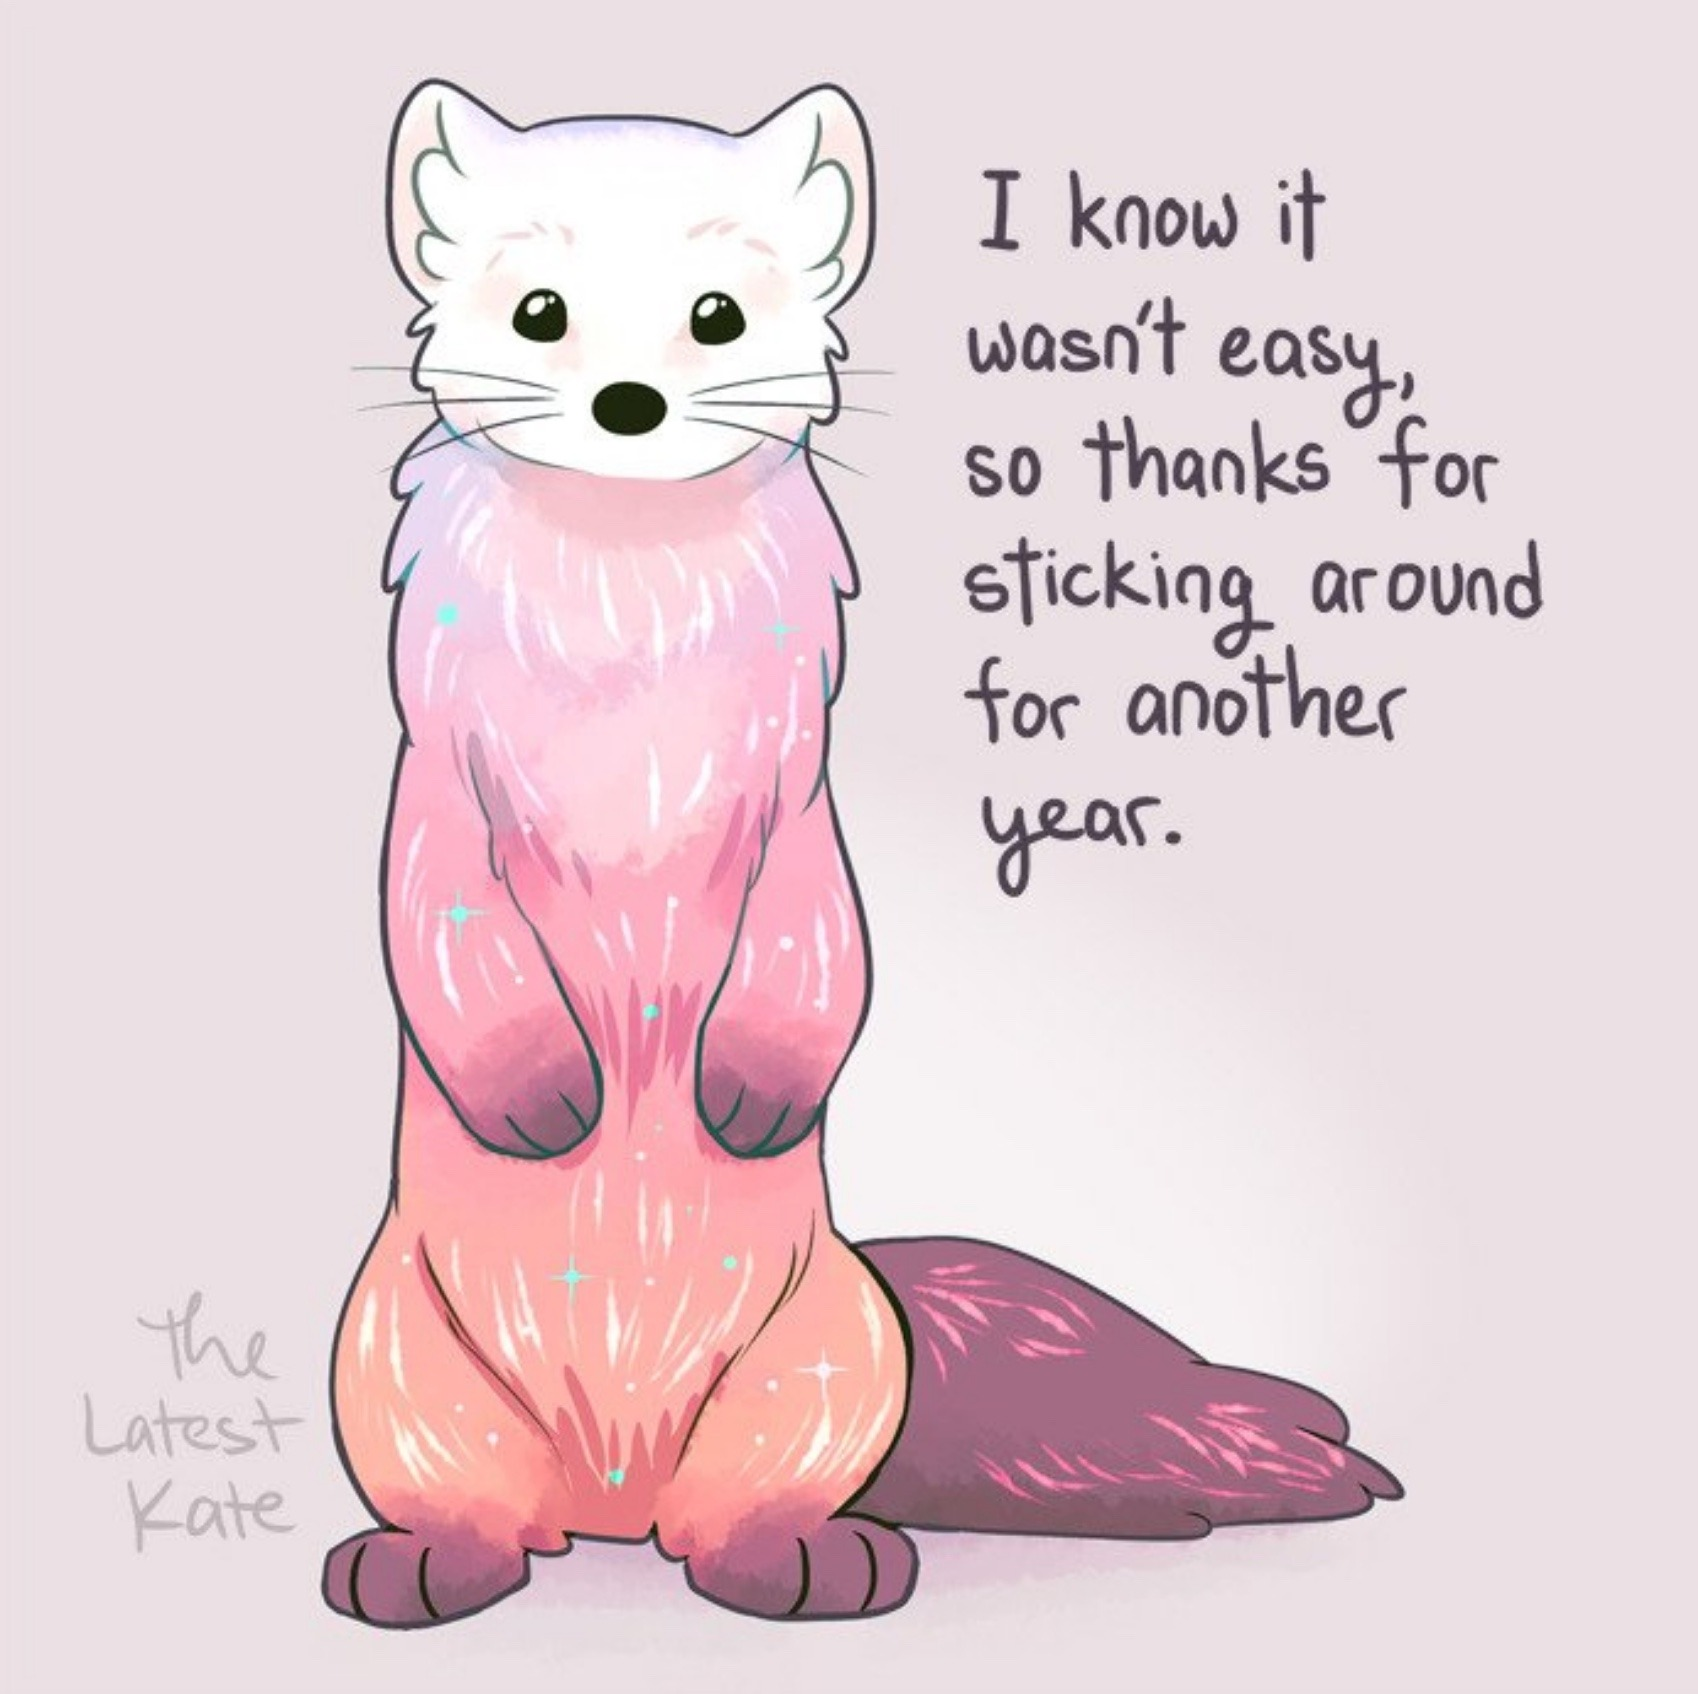 Image of a Ferret that is multi colored (white head, pink chest, darker pink and orange rest) Text says: I know it wasn't easy so thanks for sticking around for another year. Artist: TheLatestKate